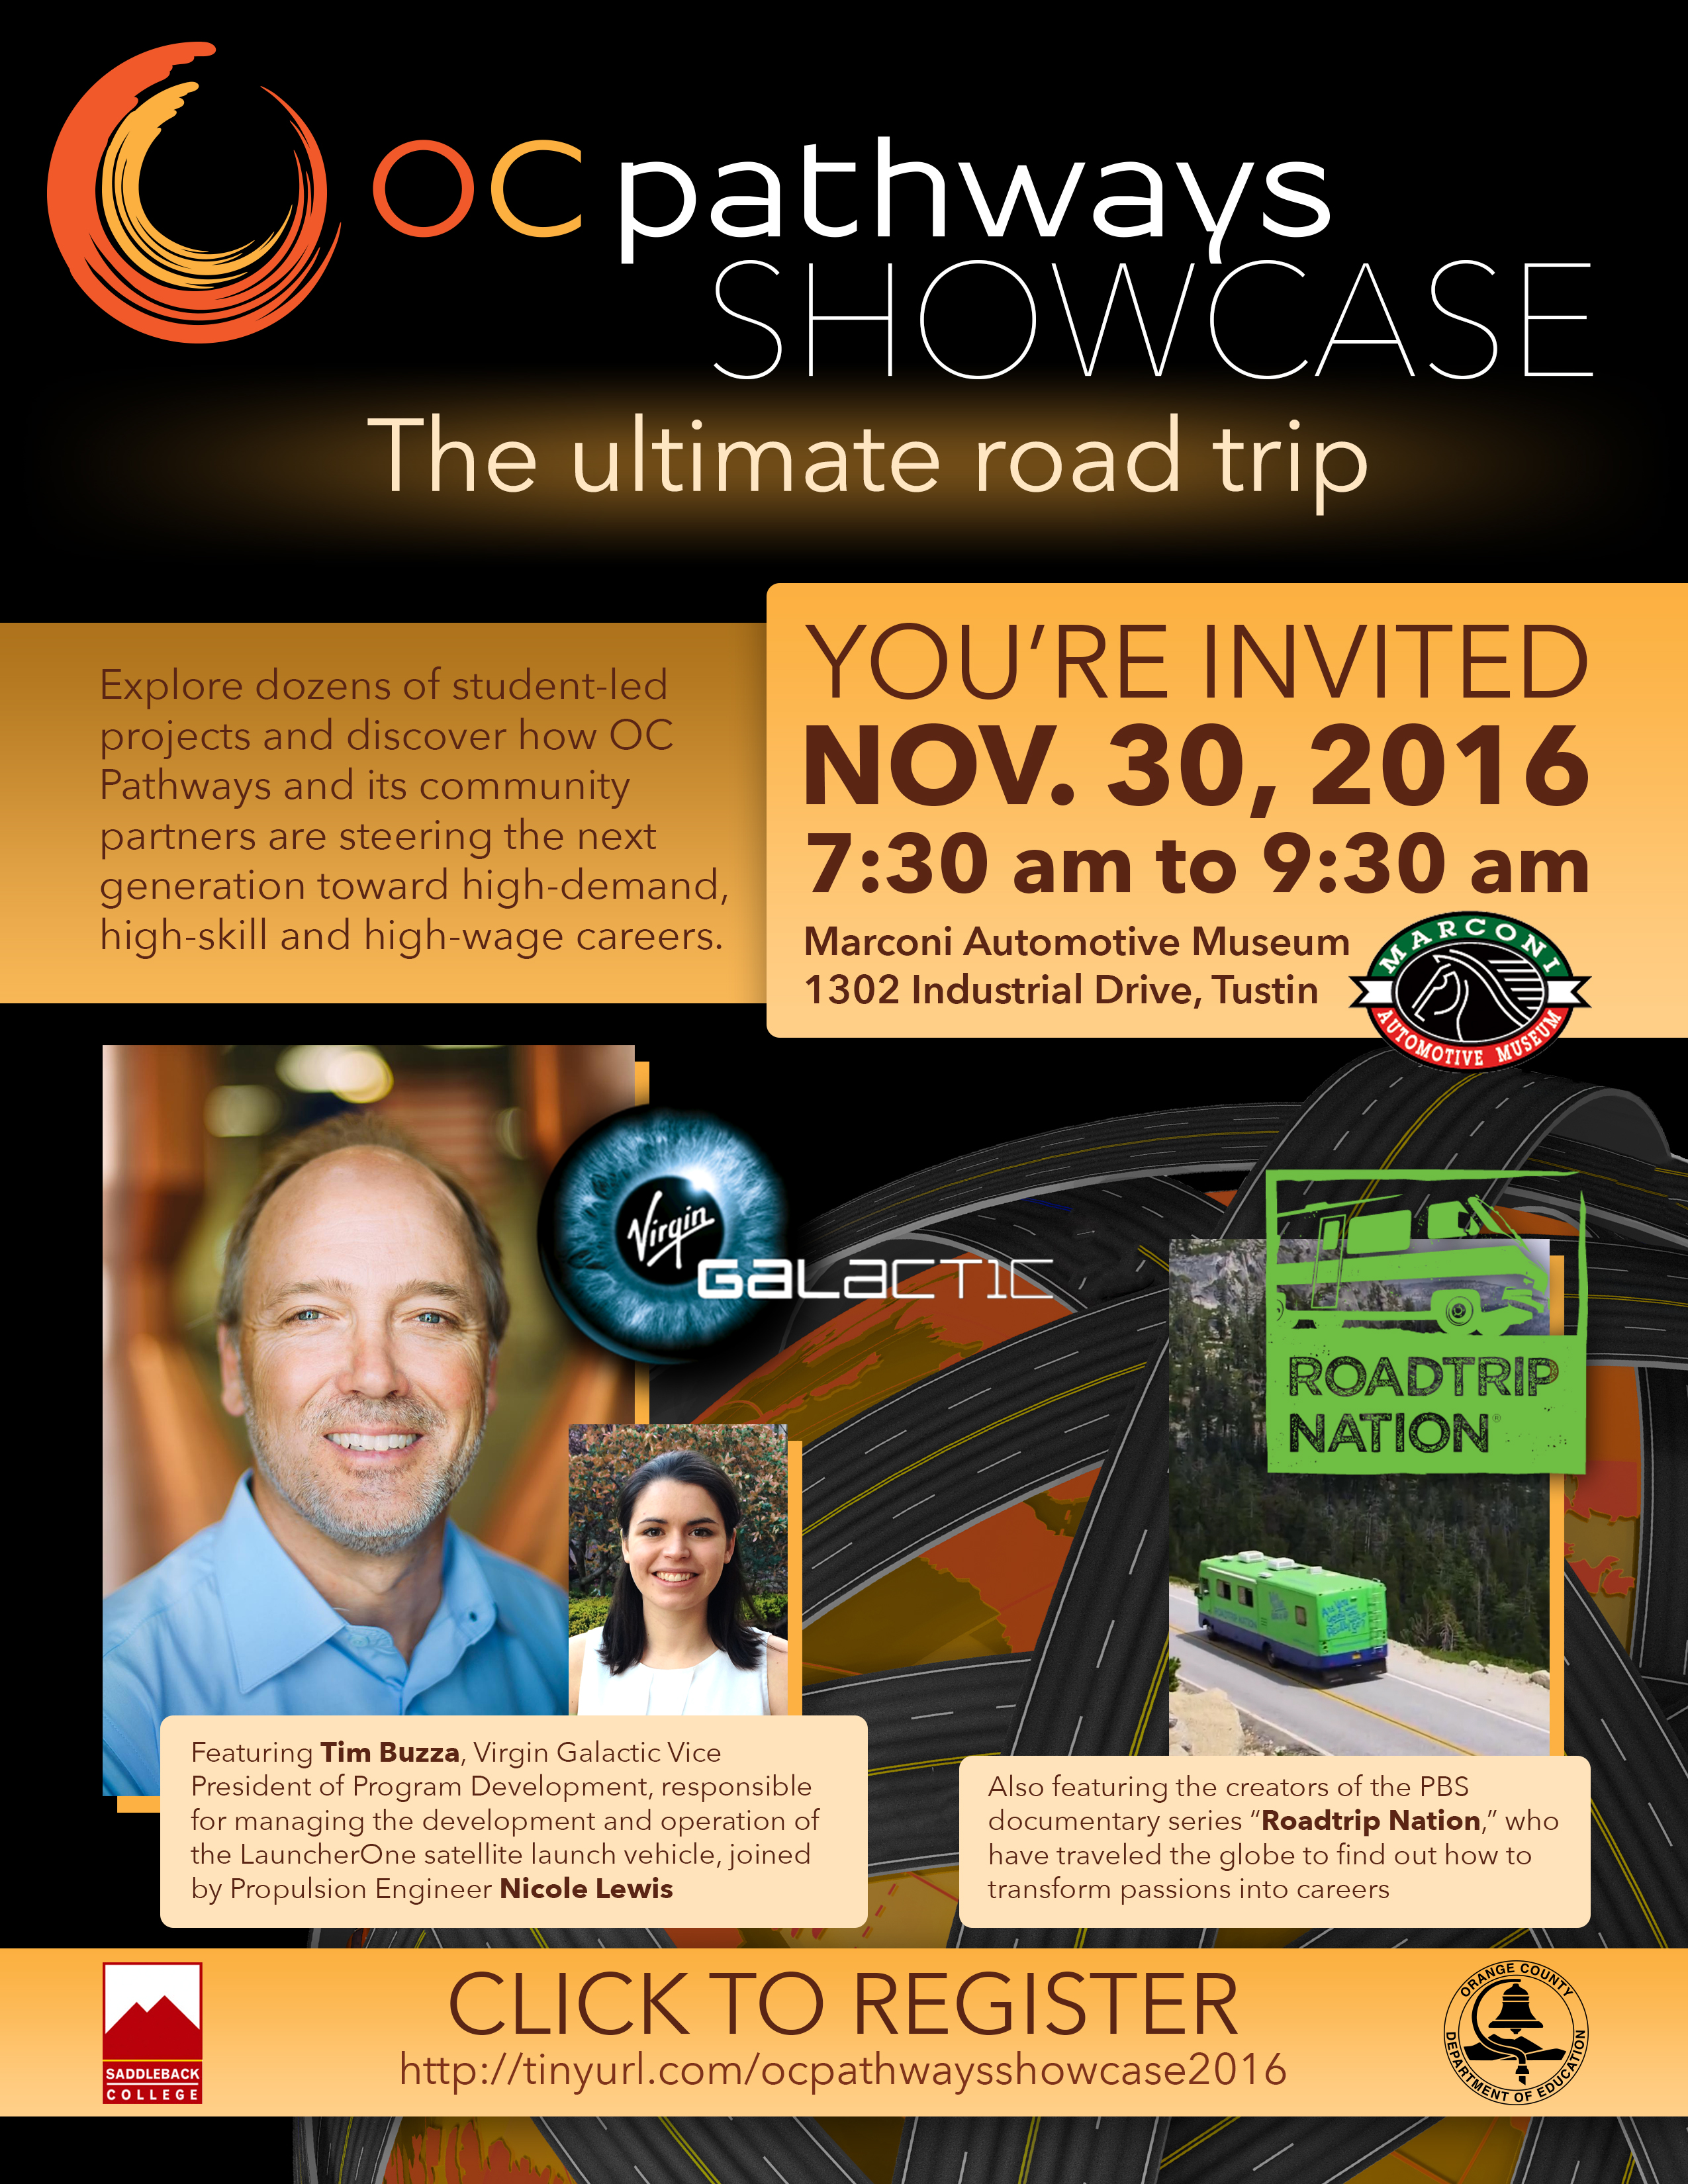 An image showing the invitation to the OC Pathways Showcase on Nov. 30